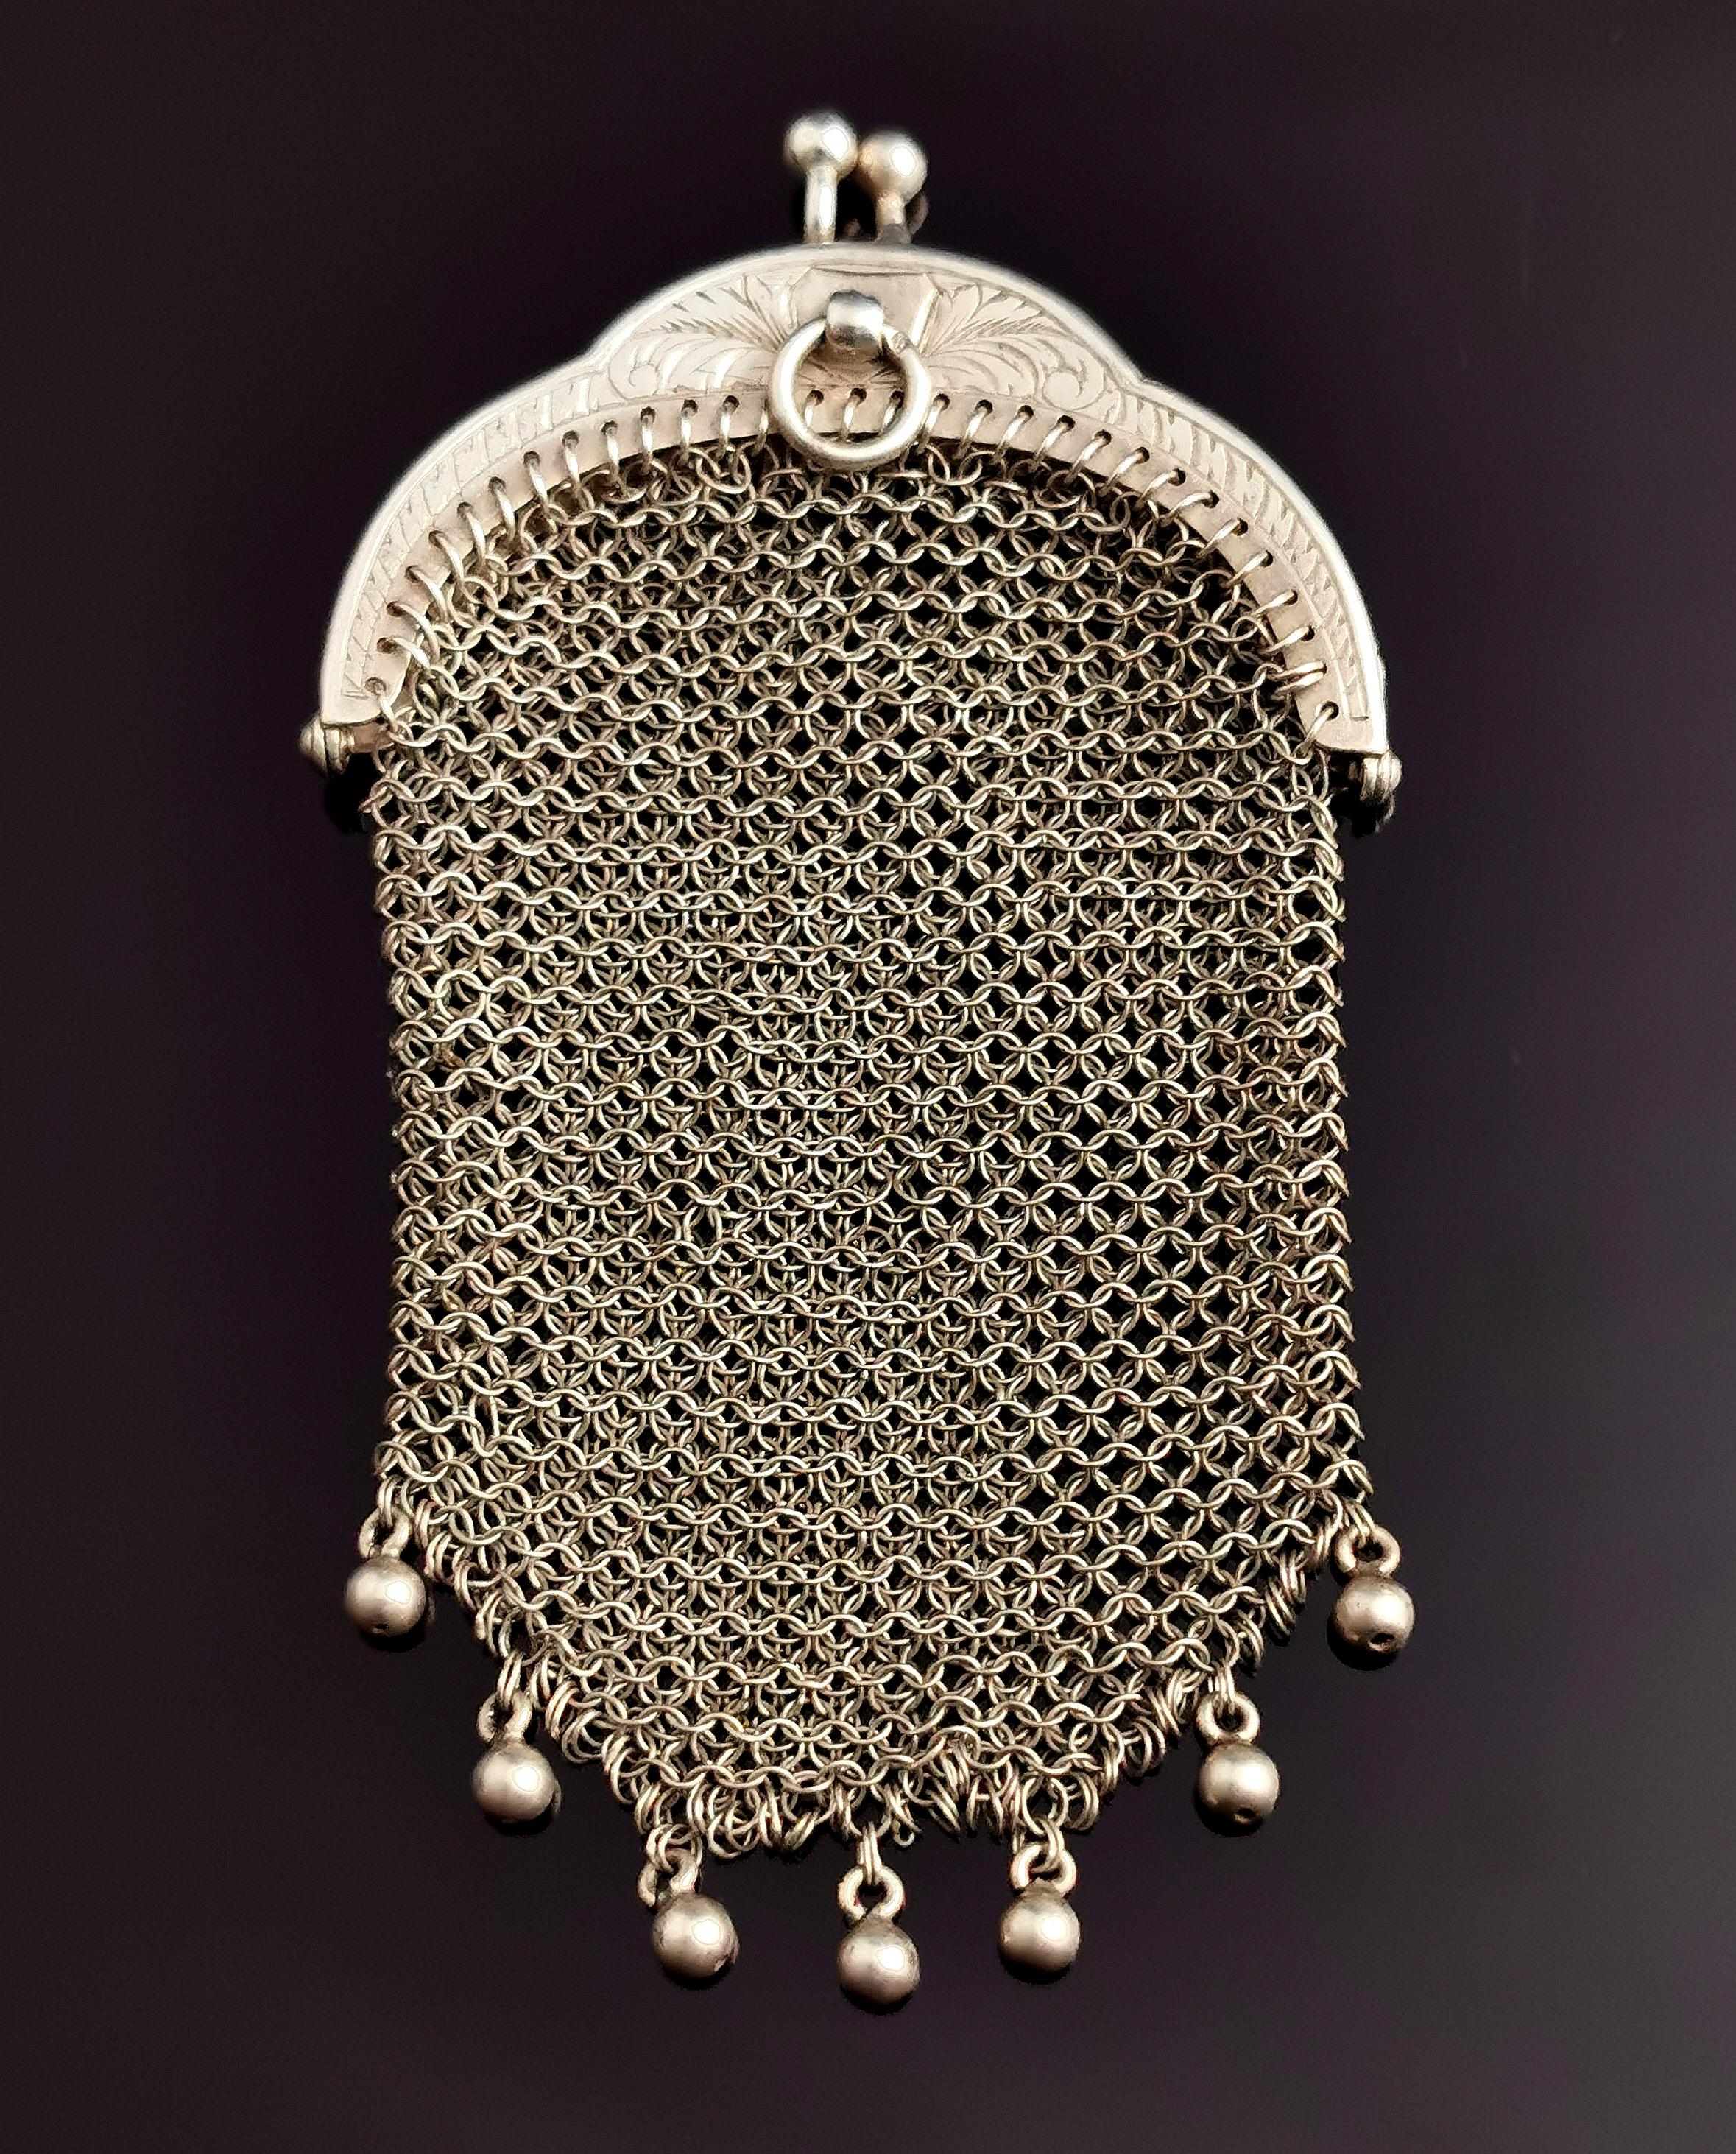 A stunning antique French silver coin purse.

The body is made up from intricately woven and delicate 800 silver mesh.

The base of the purse features a beaded fringe with 7 silver beads and it has a wonderfully pretty engraved silver frame with a